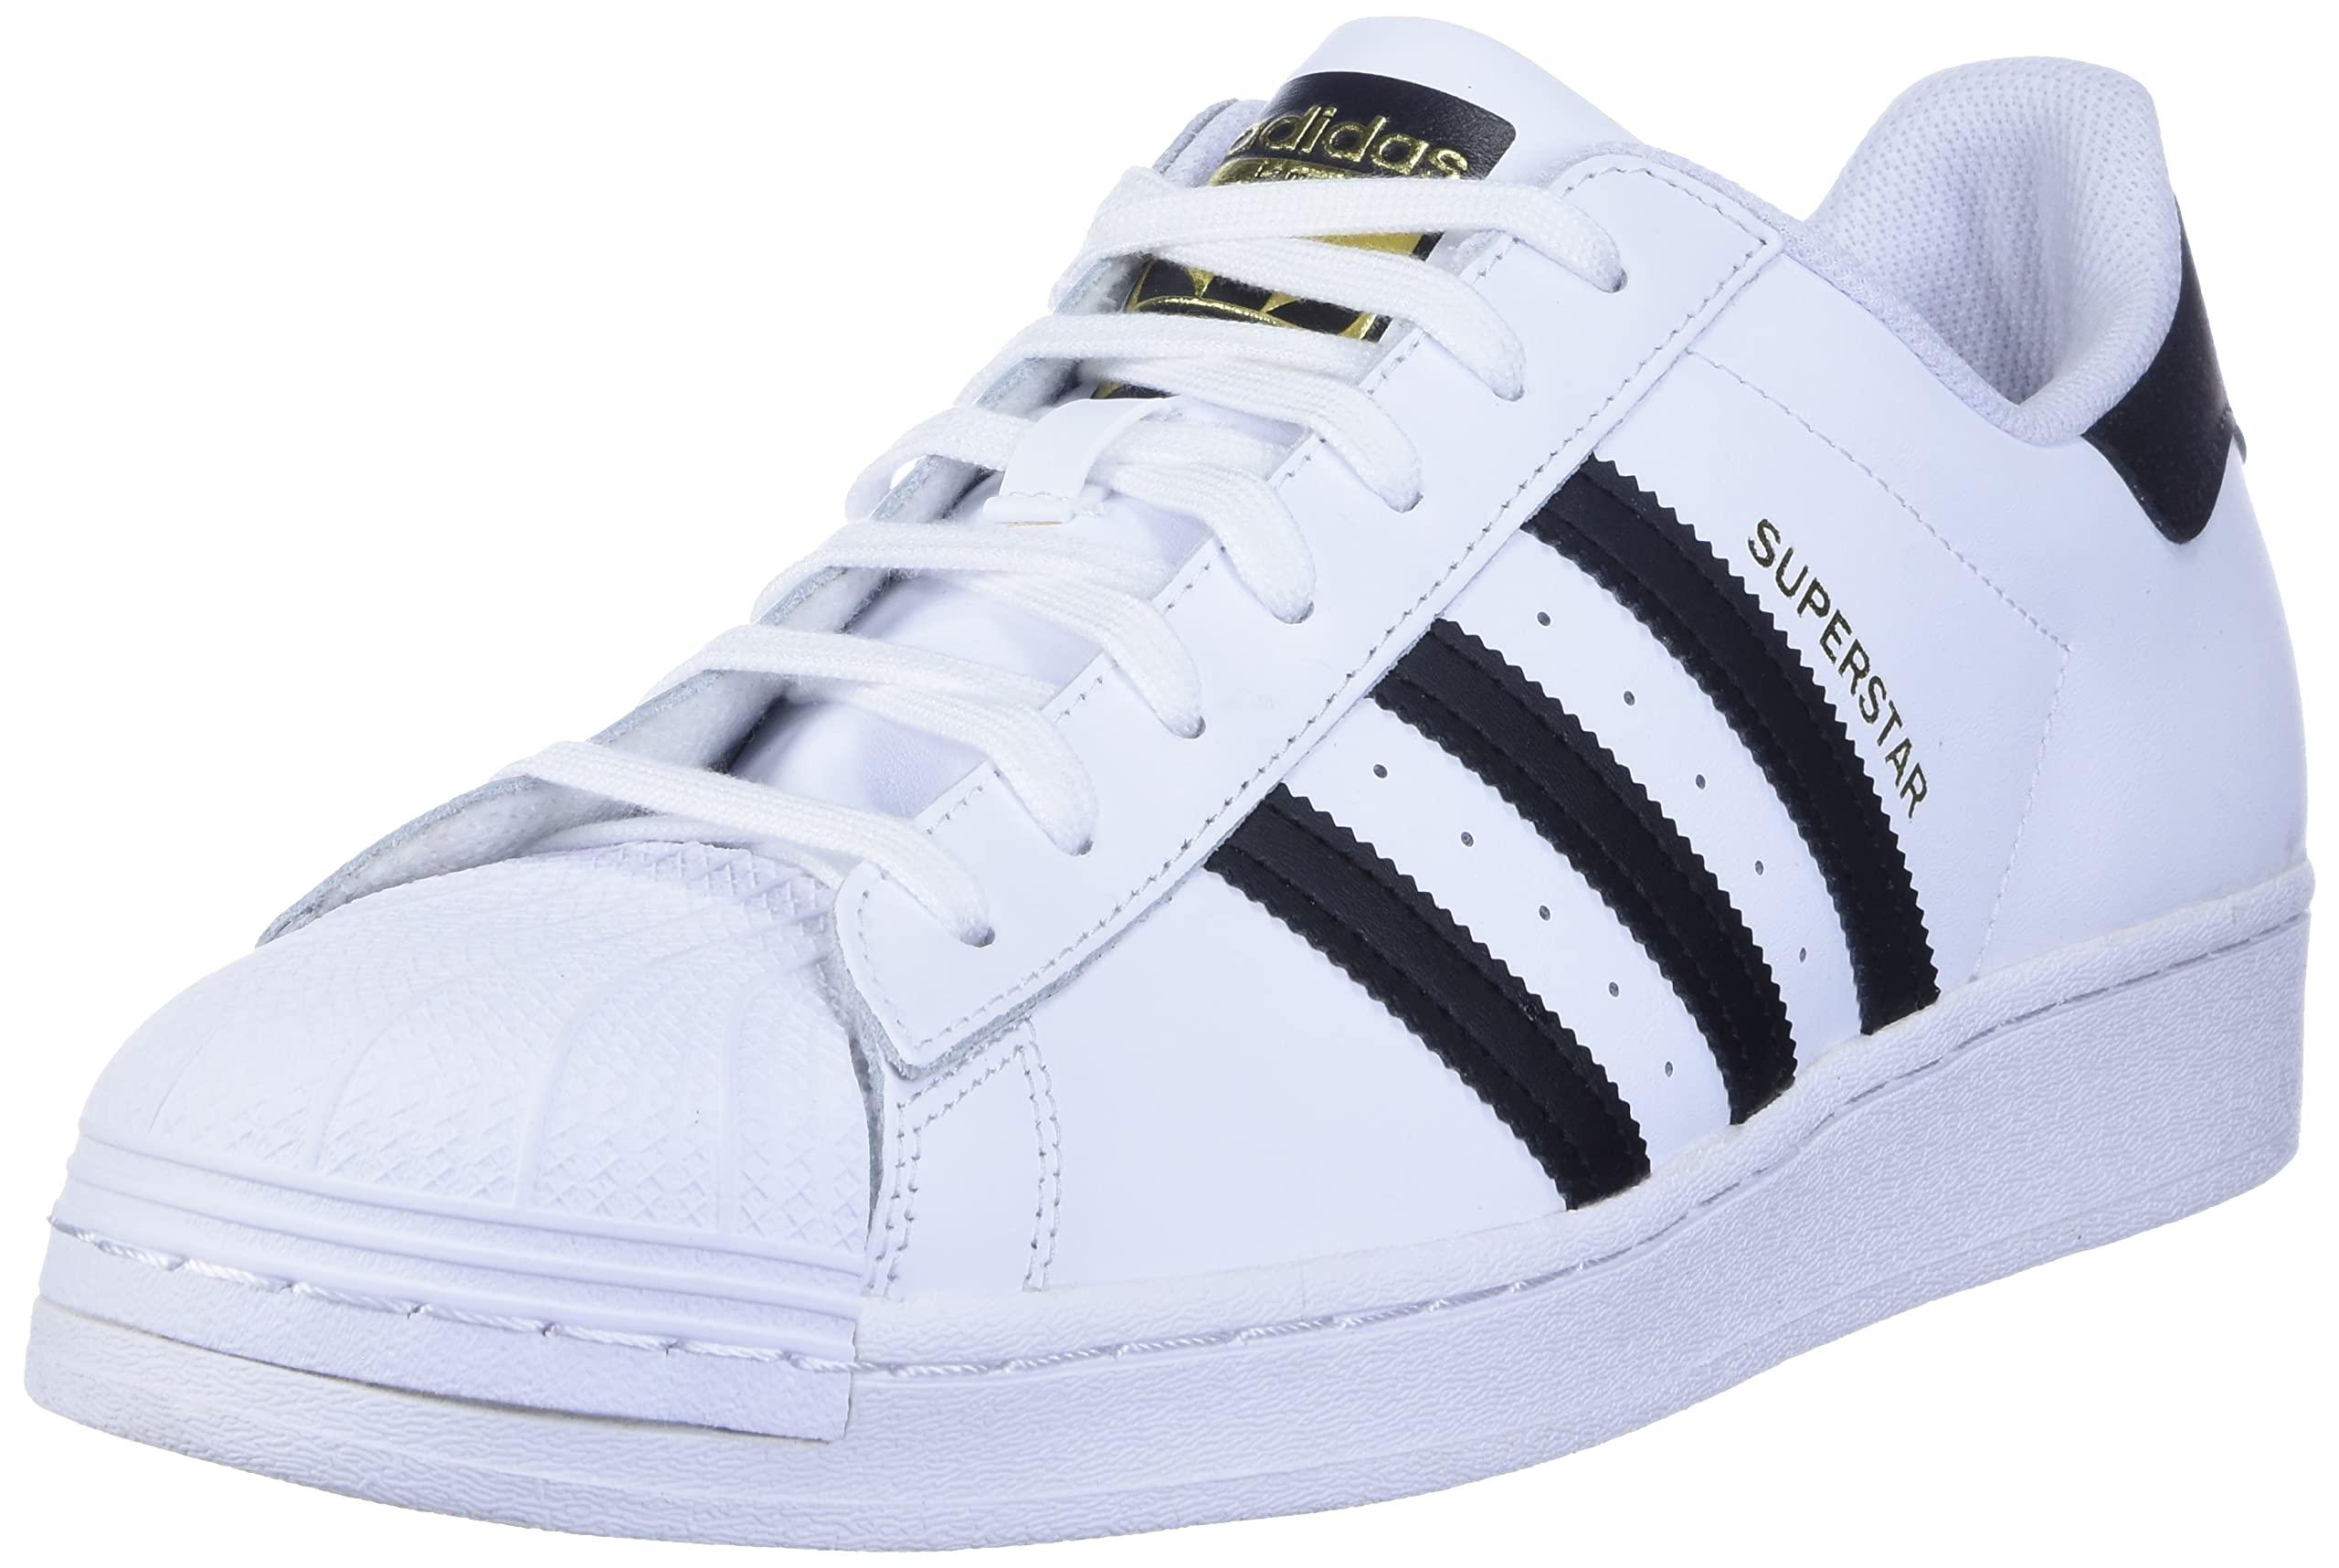 Affect Eyesight carry out adidas basket superstar s75880 blanc noir  pharmacy grocery store Lazy